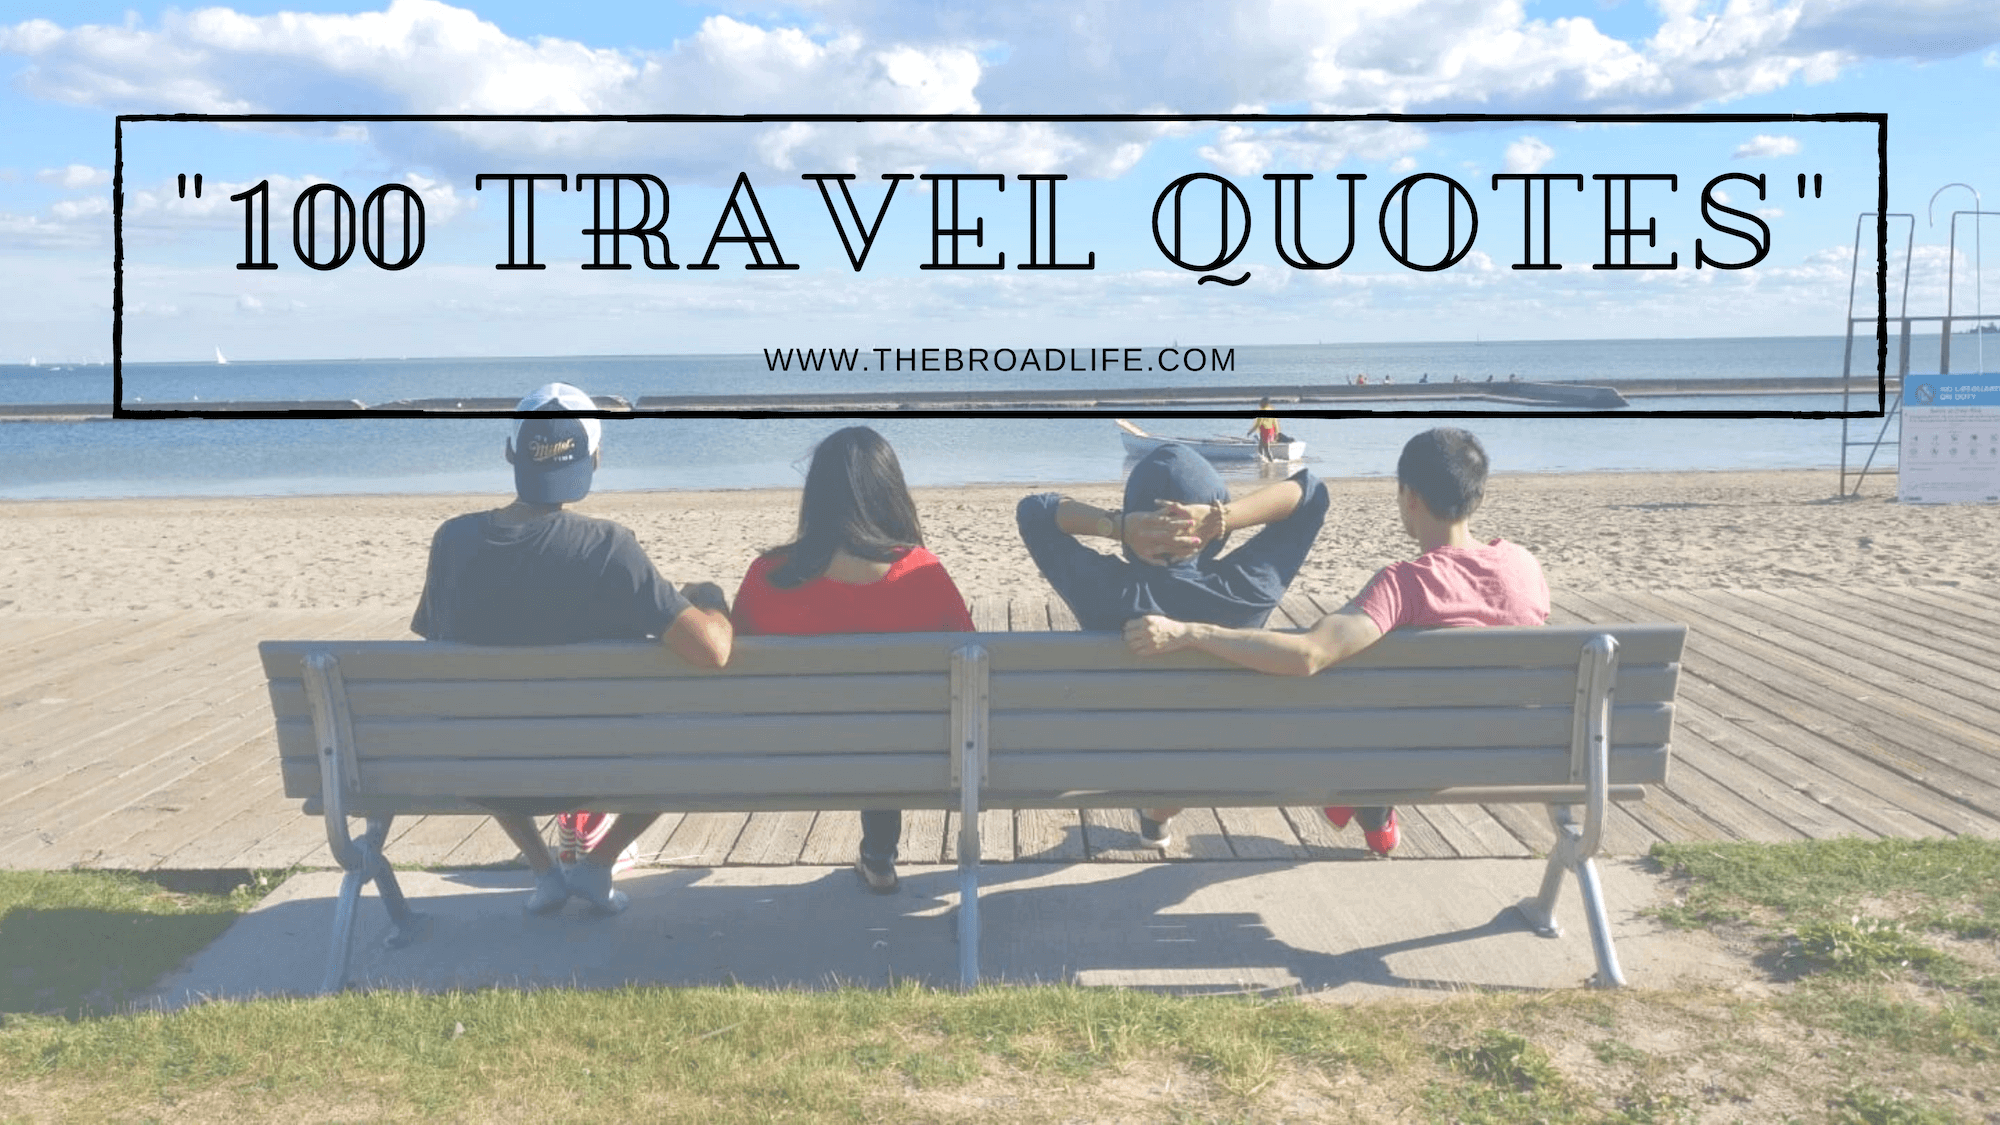 The Broad Life's inspirational travel quotes